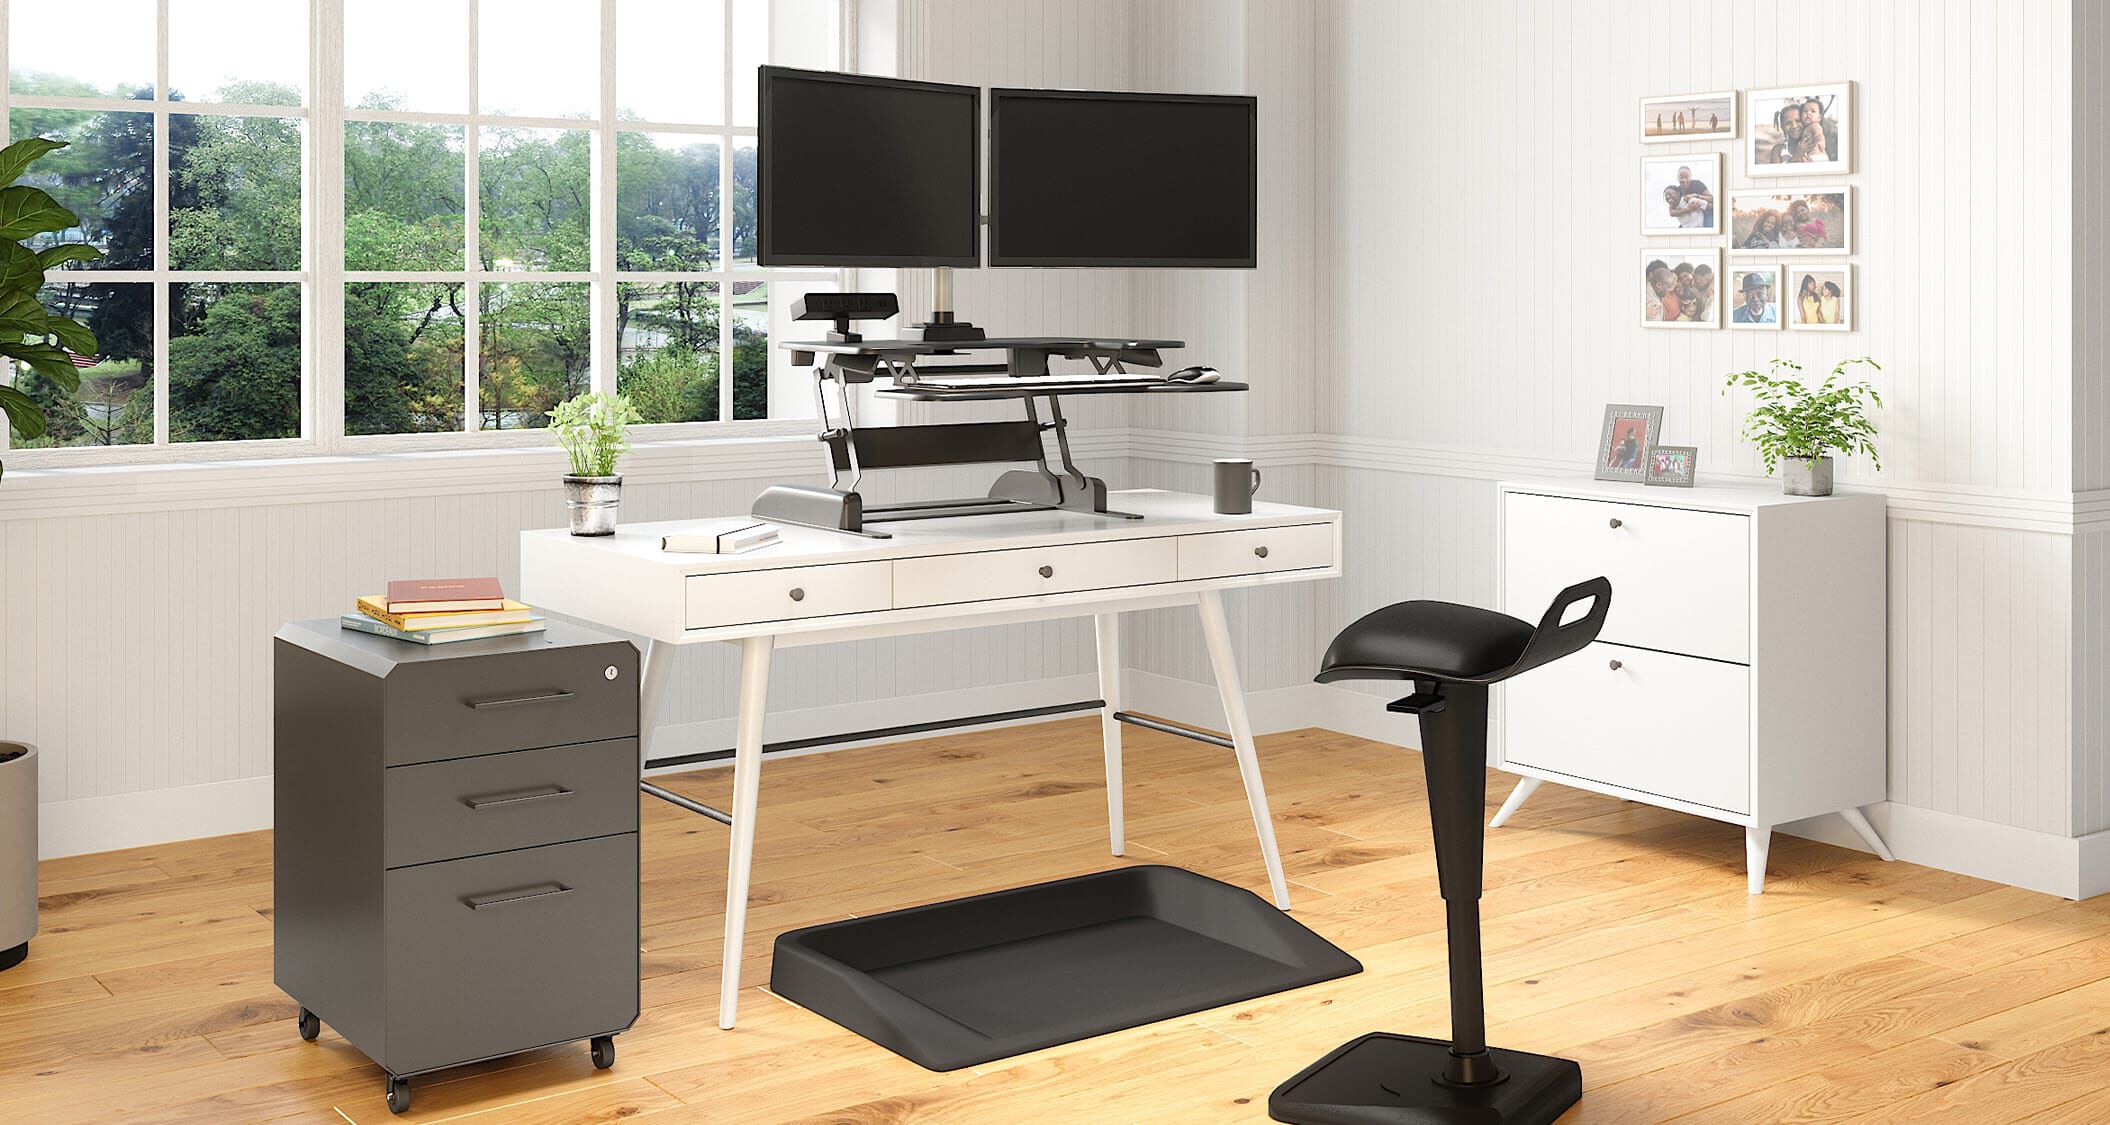 Converter placed on existing desk to create sit-stand home office